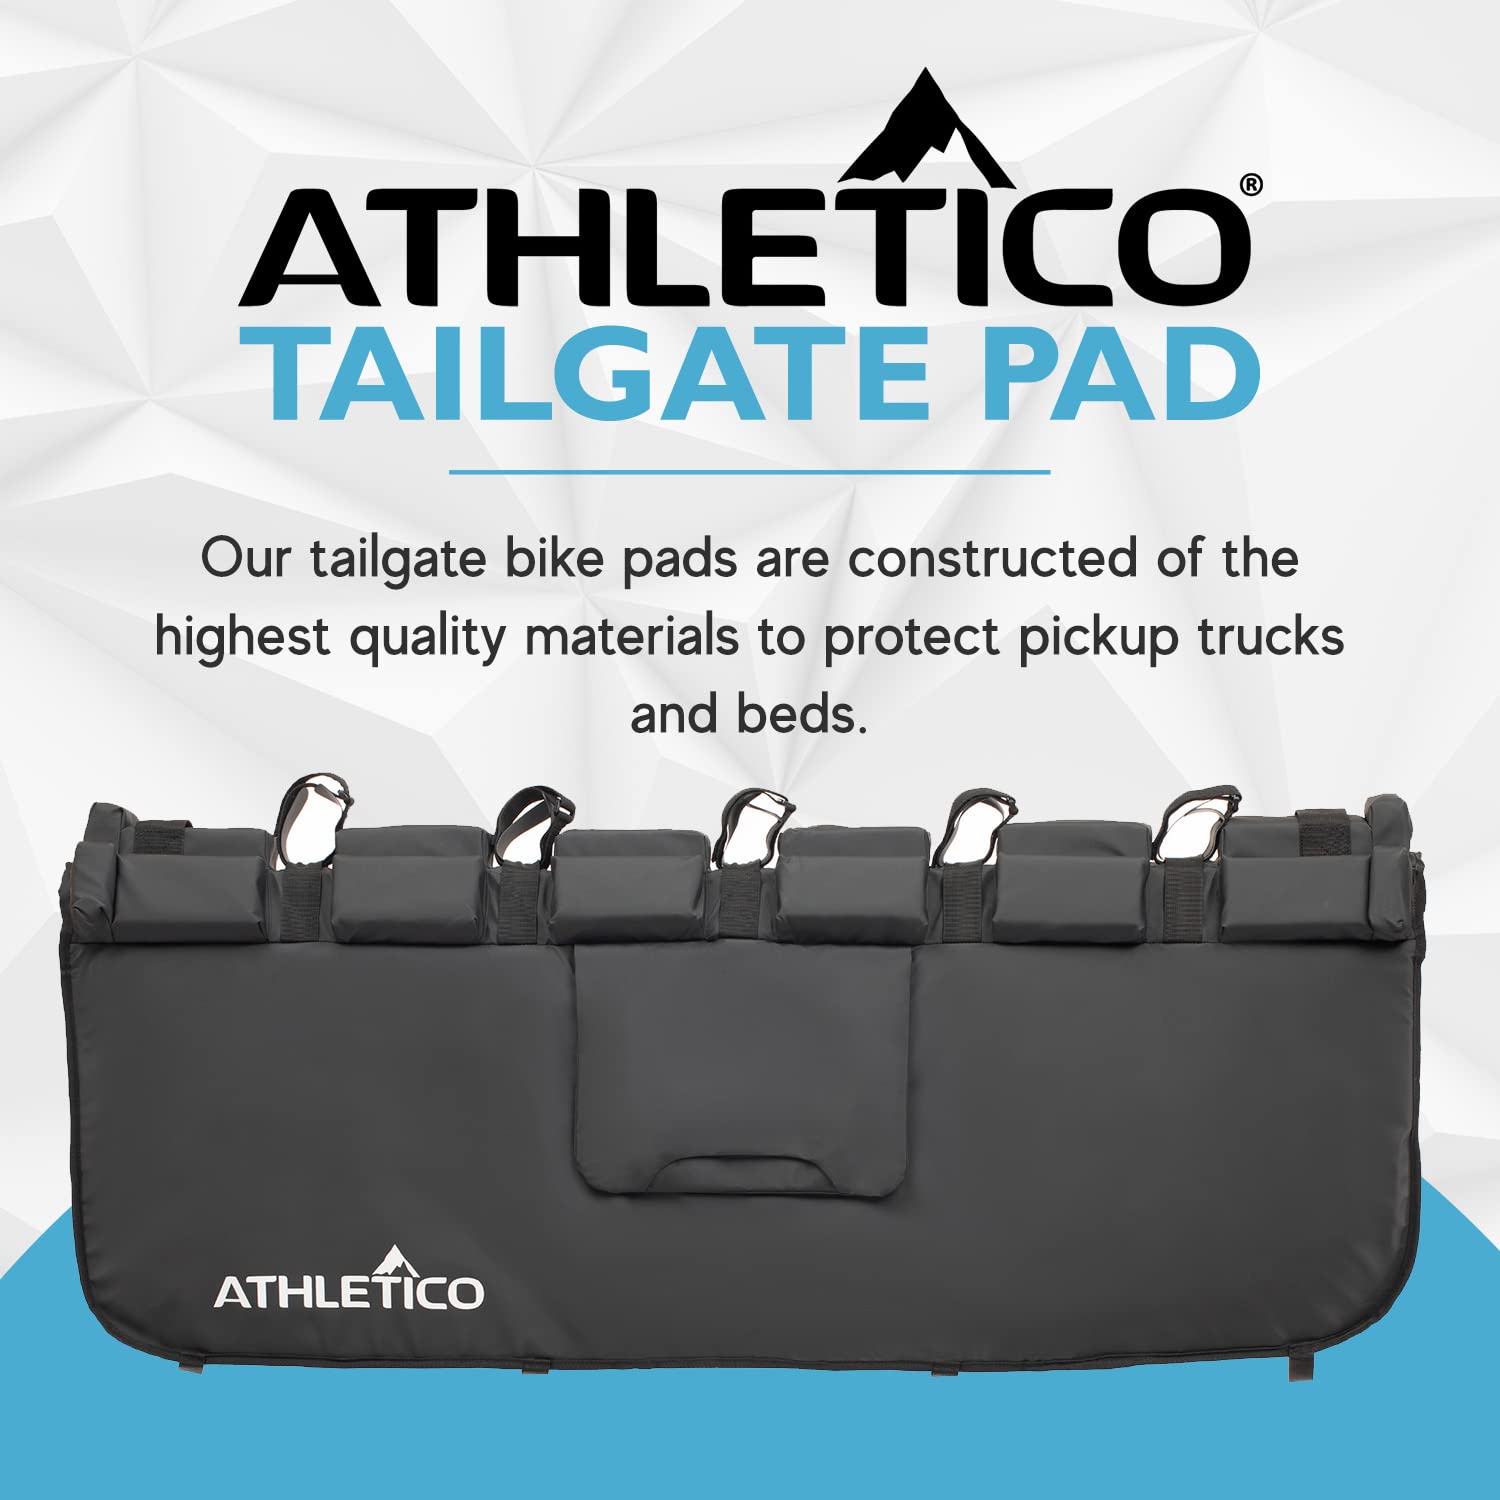 Athletico Tailgate Pad for Bikes - Truck Tailgate Bike Pads - Bike Tailgate Pad Carries Up to 6 Bikes - Protects Truck Bed & Mountain Bikes - Truck Bike Tailgate Pad with Backup Camera Opening  - Like New